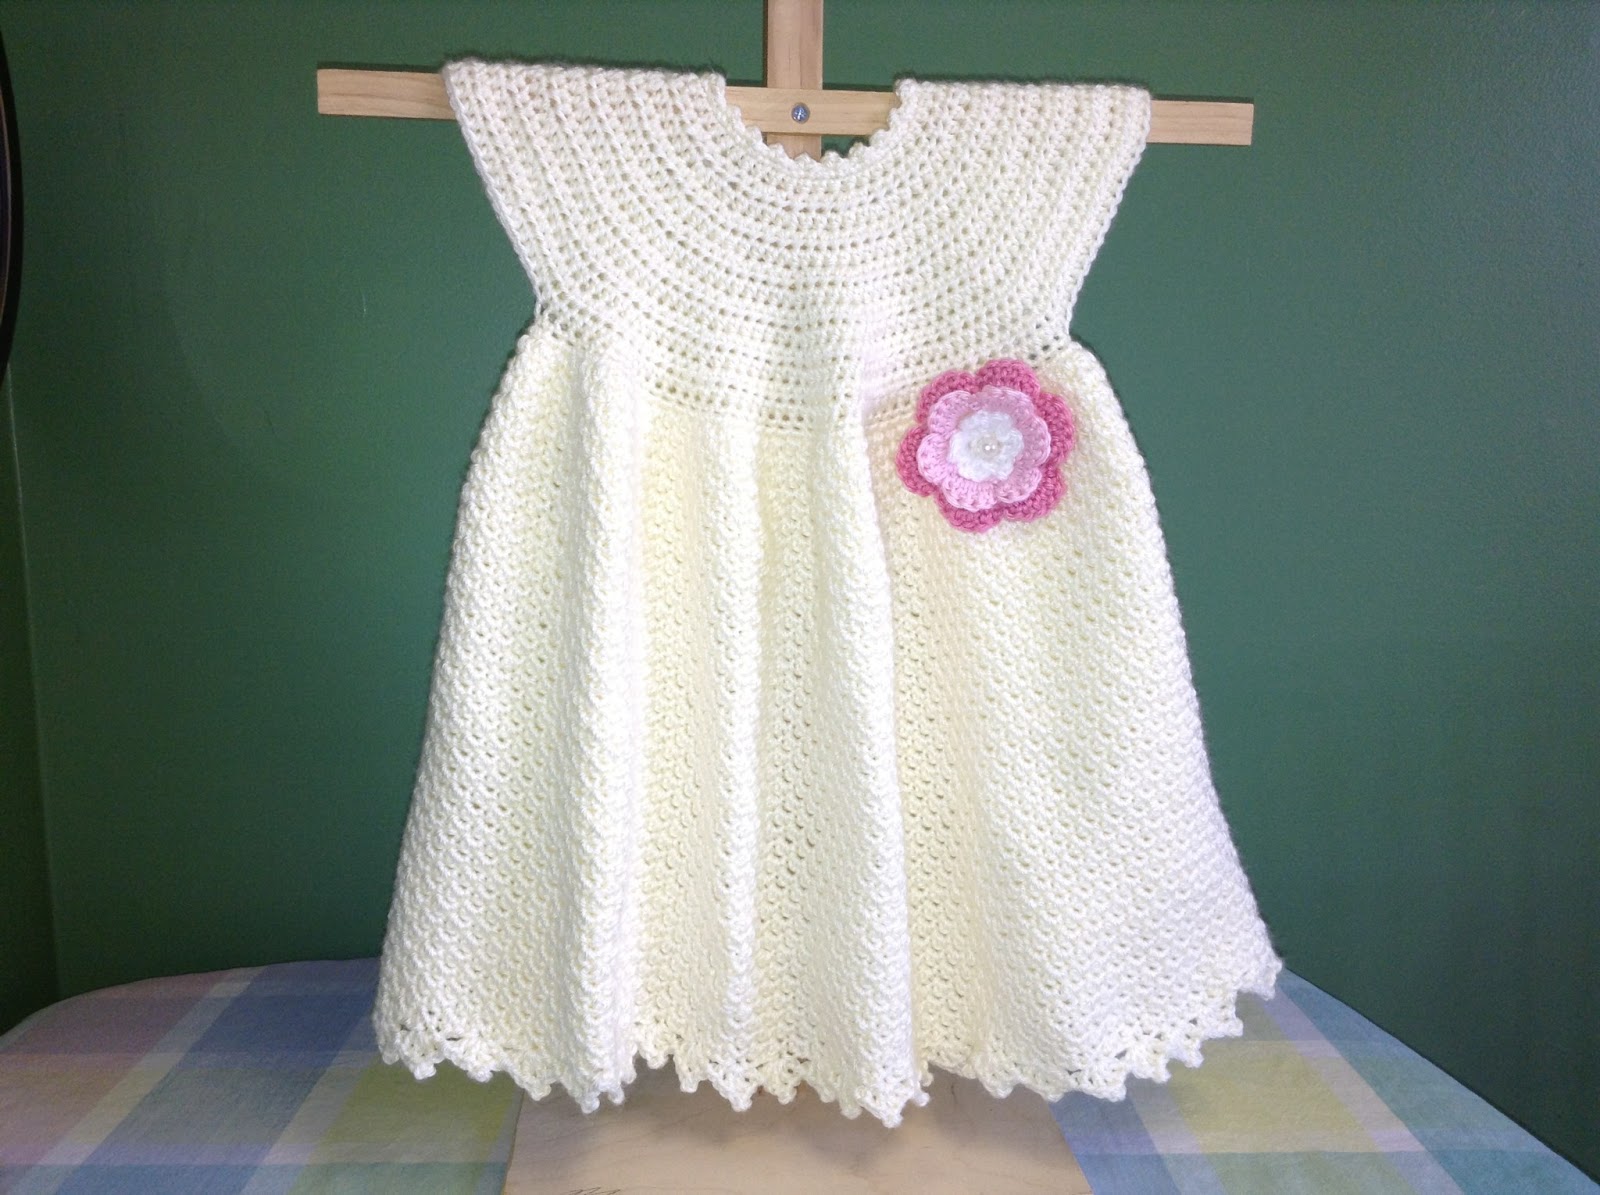 Pretty baby dress with crocheted rosette